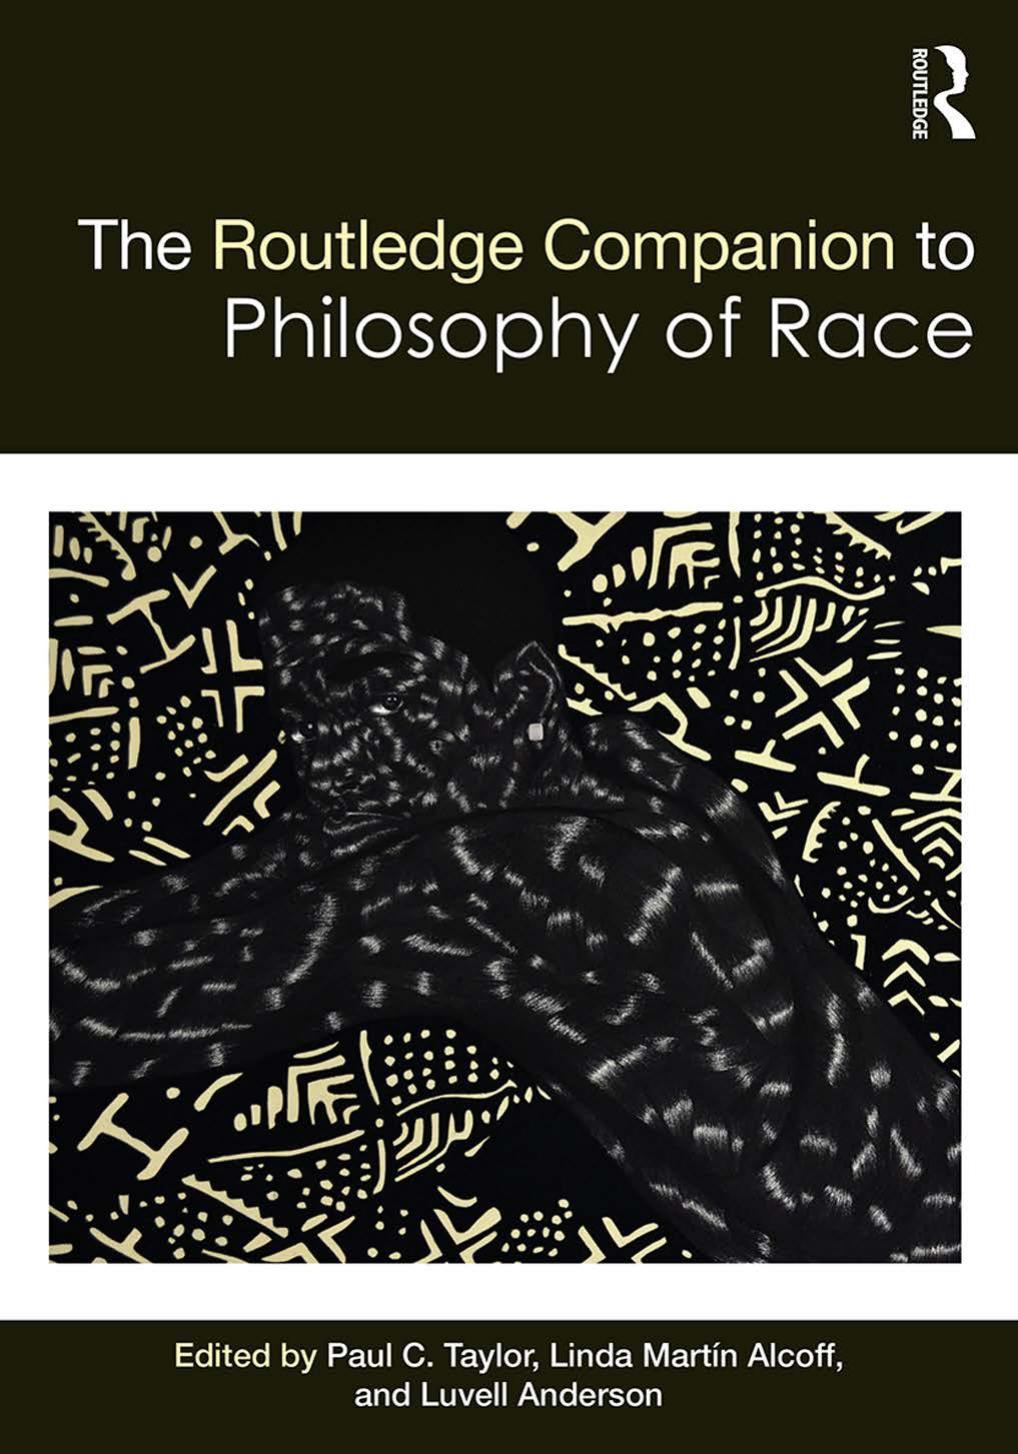 The Routledge Companion to Philosophy of Race